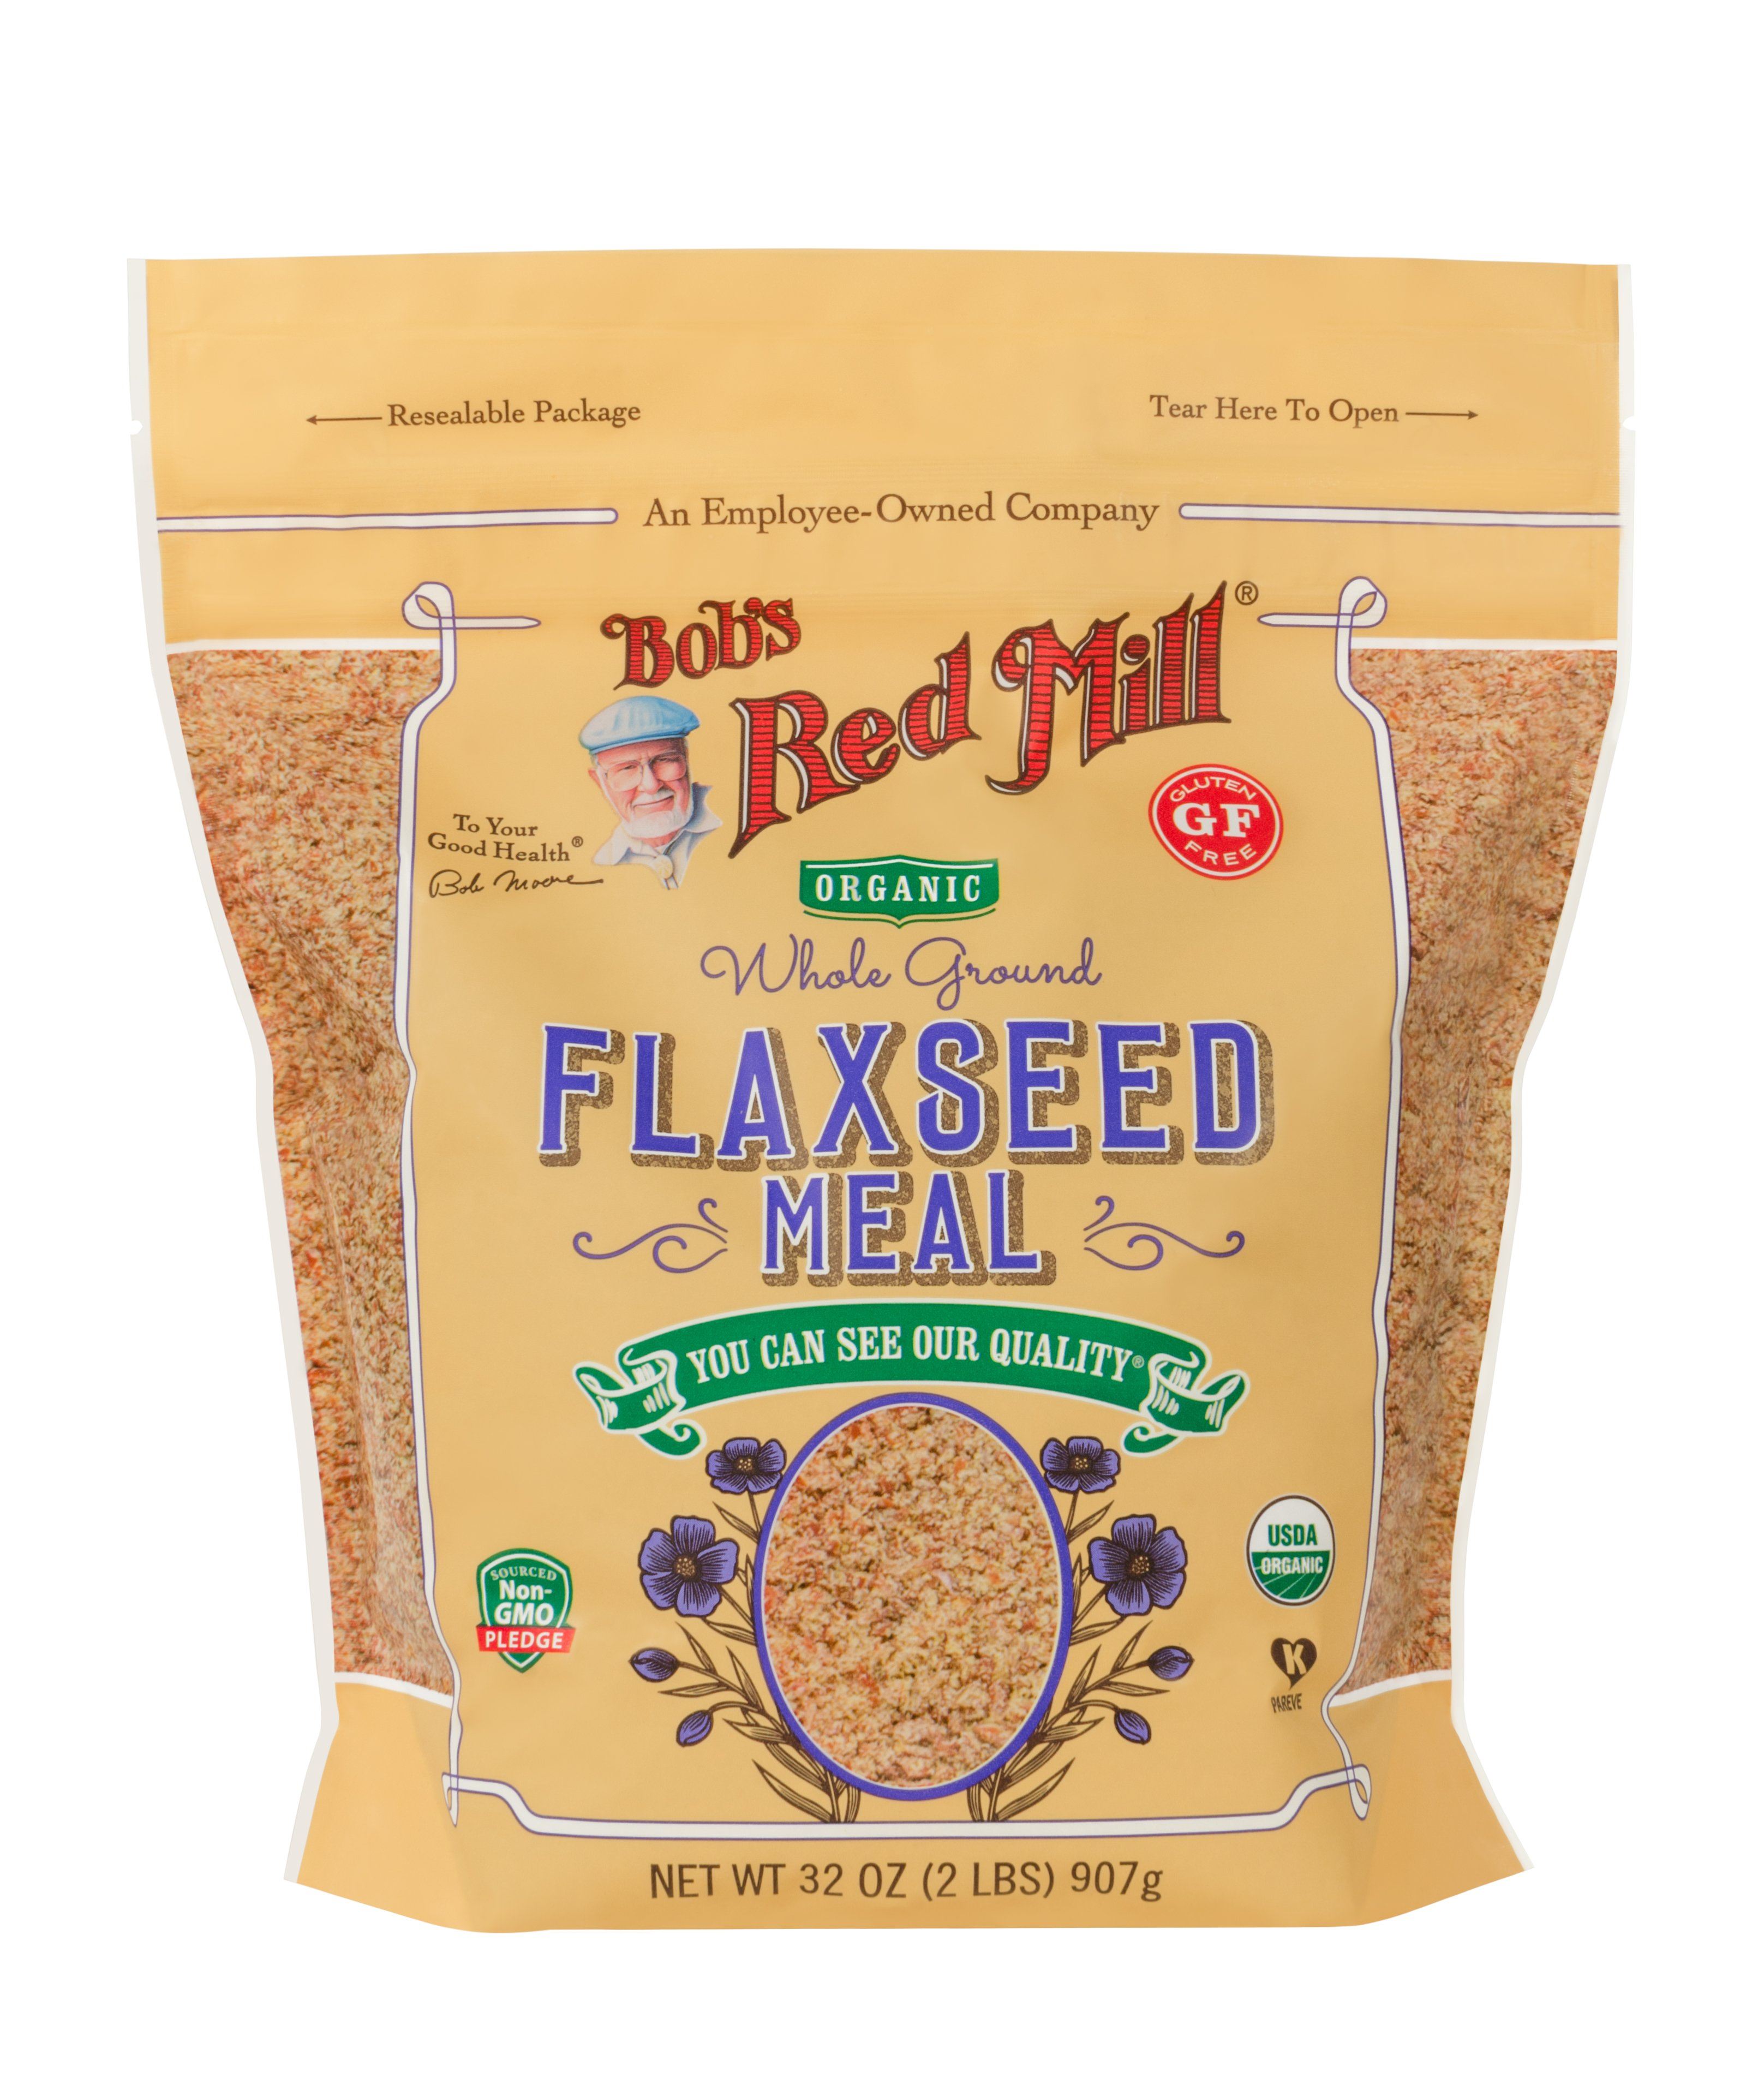 Bob's Red Mill Flaxseed Meal Bob's Red Mill Organic Brown 13 Ounce 